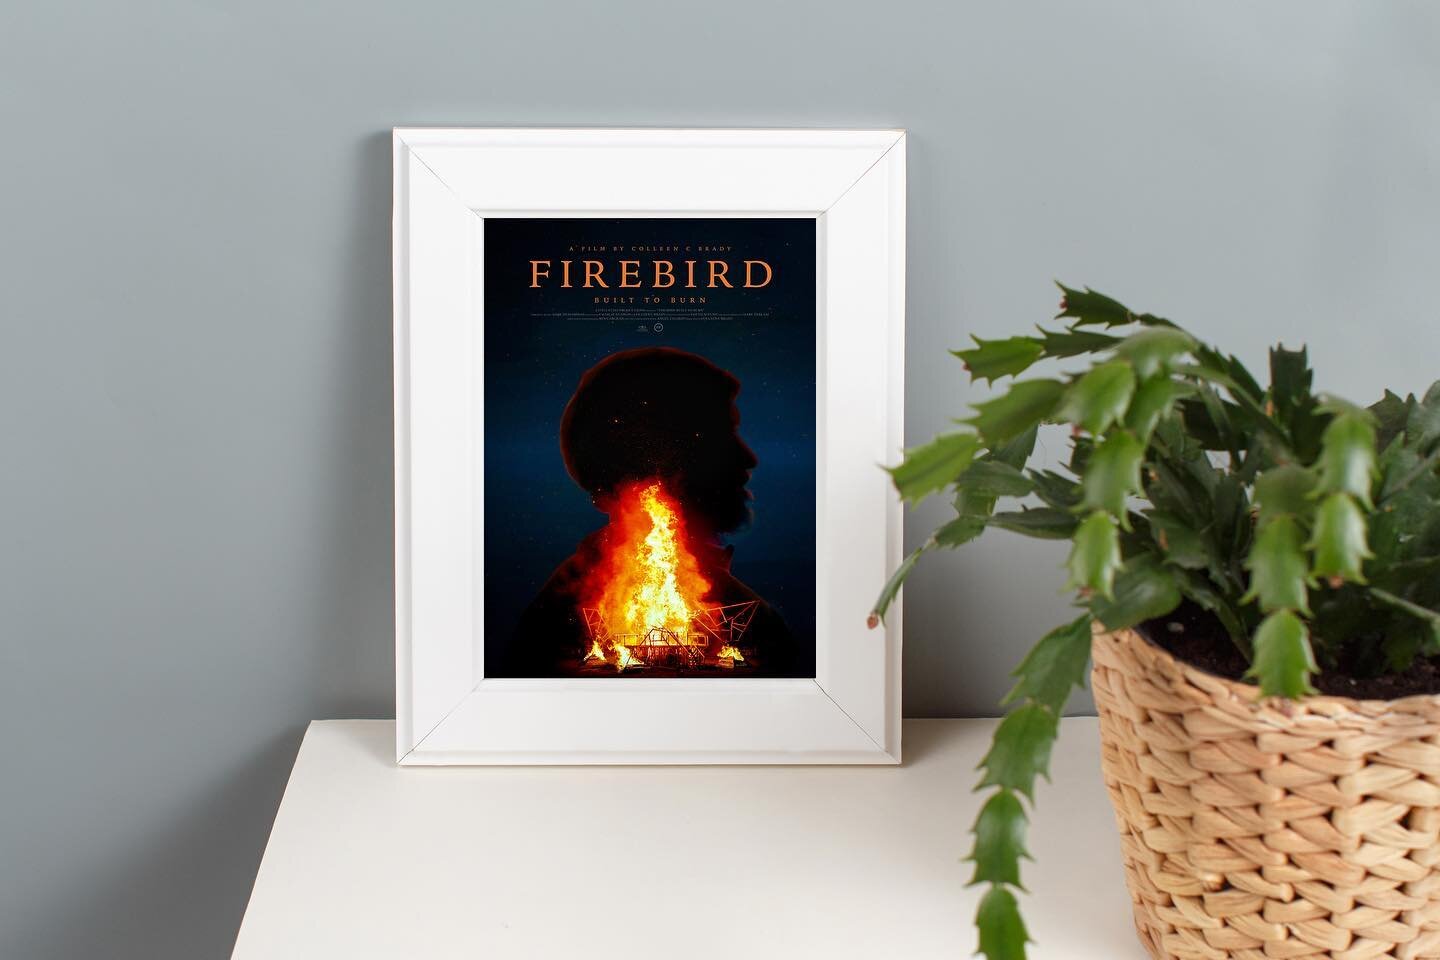 🔥POSTER GIVEAWAY🔥

Enter to win a PHYSICAL COPY of our beautiful official poster!! It&rsquo;s even better in person, trust us.

Enter in three easy steps:
1. LIKE this post
2. FOLLOW @firebirddocumentary 
3. TAG a friend in the comments of this pos